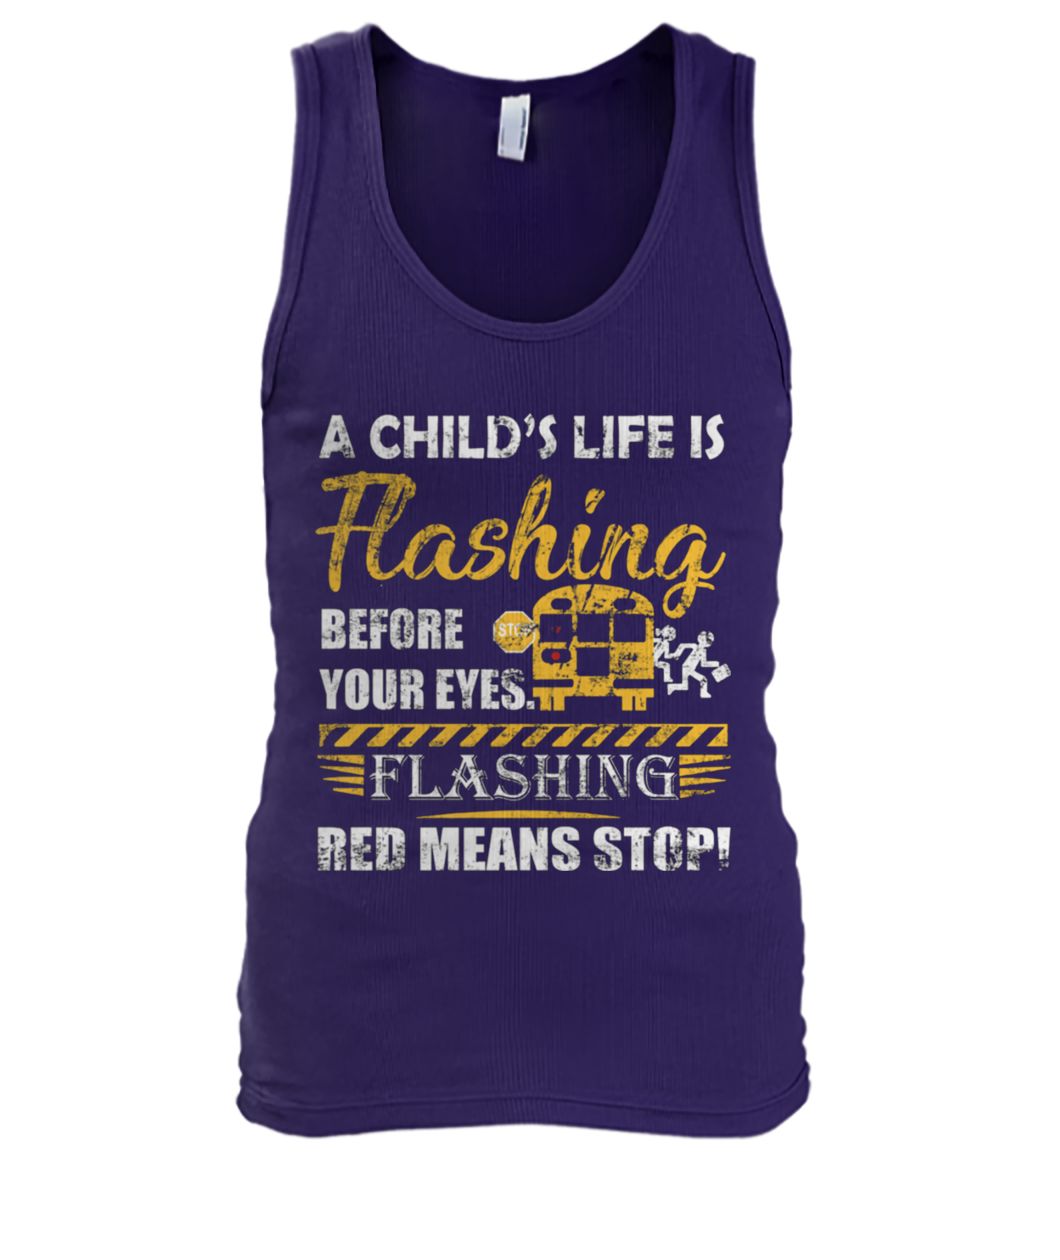 A child’s life is flashing before your eyes flashing red means stop men's tank top